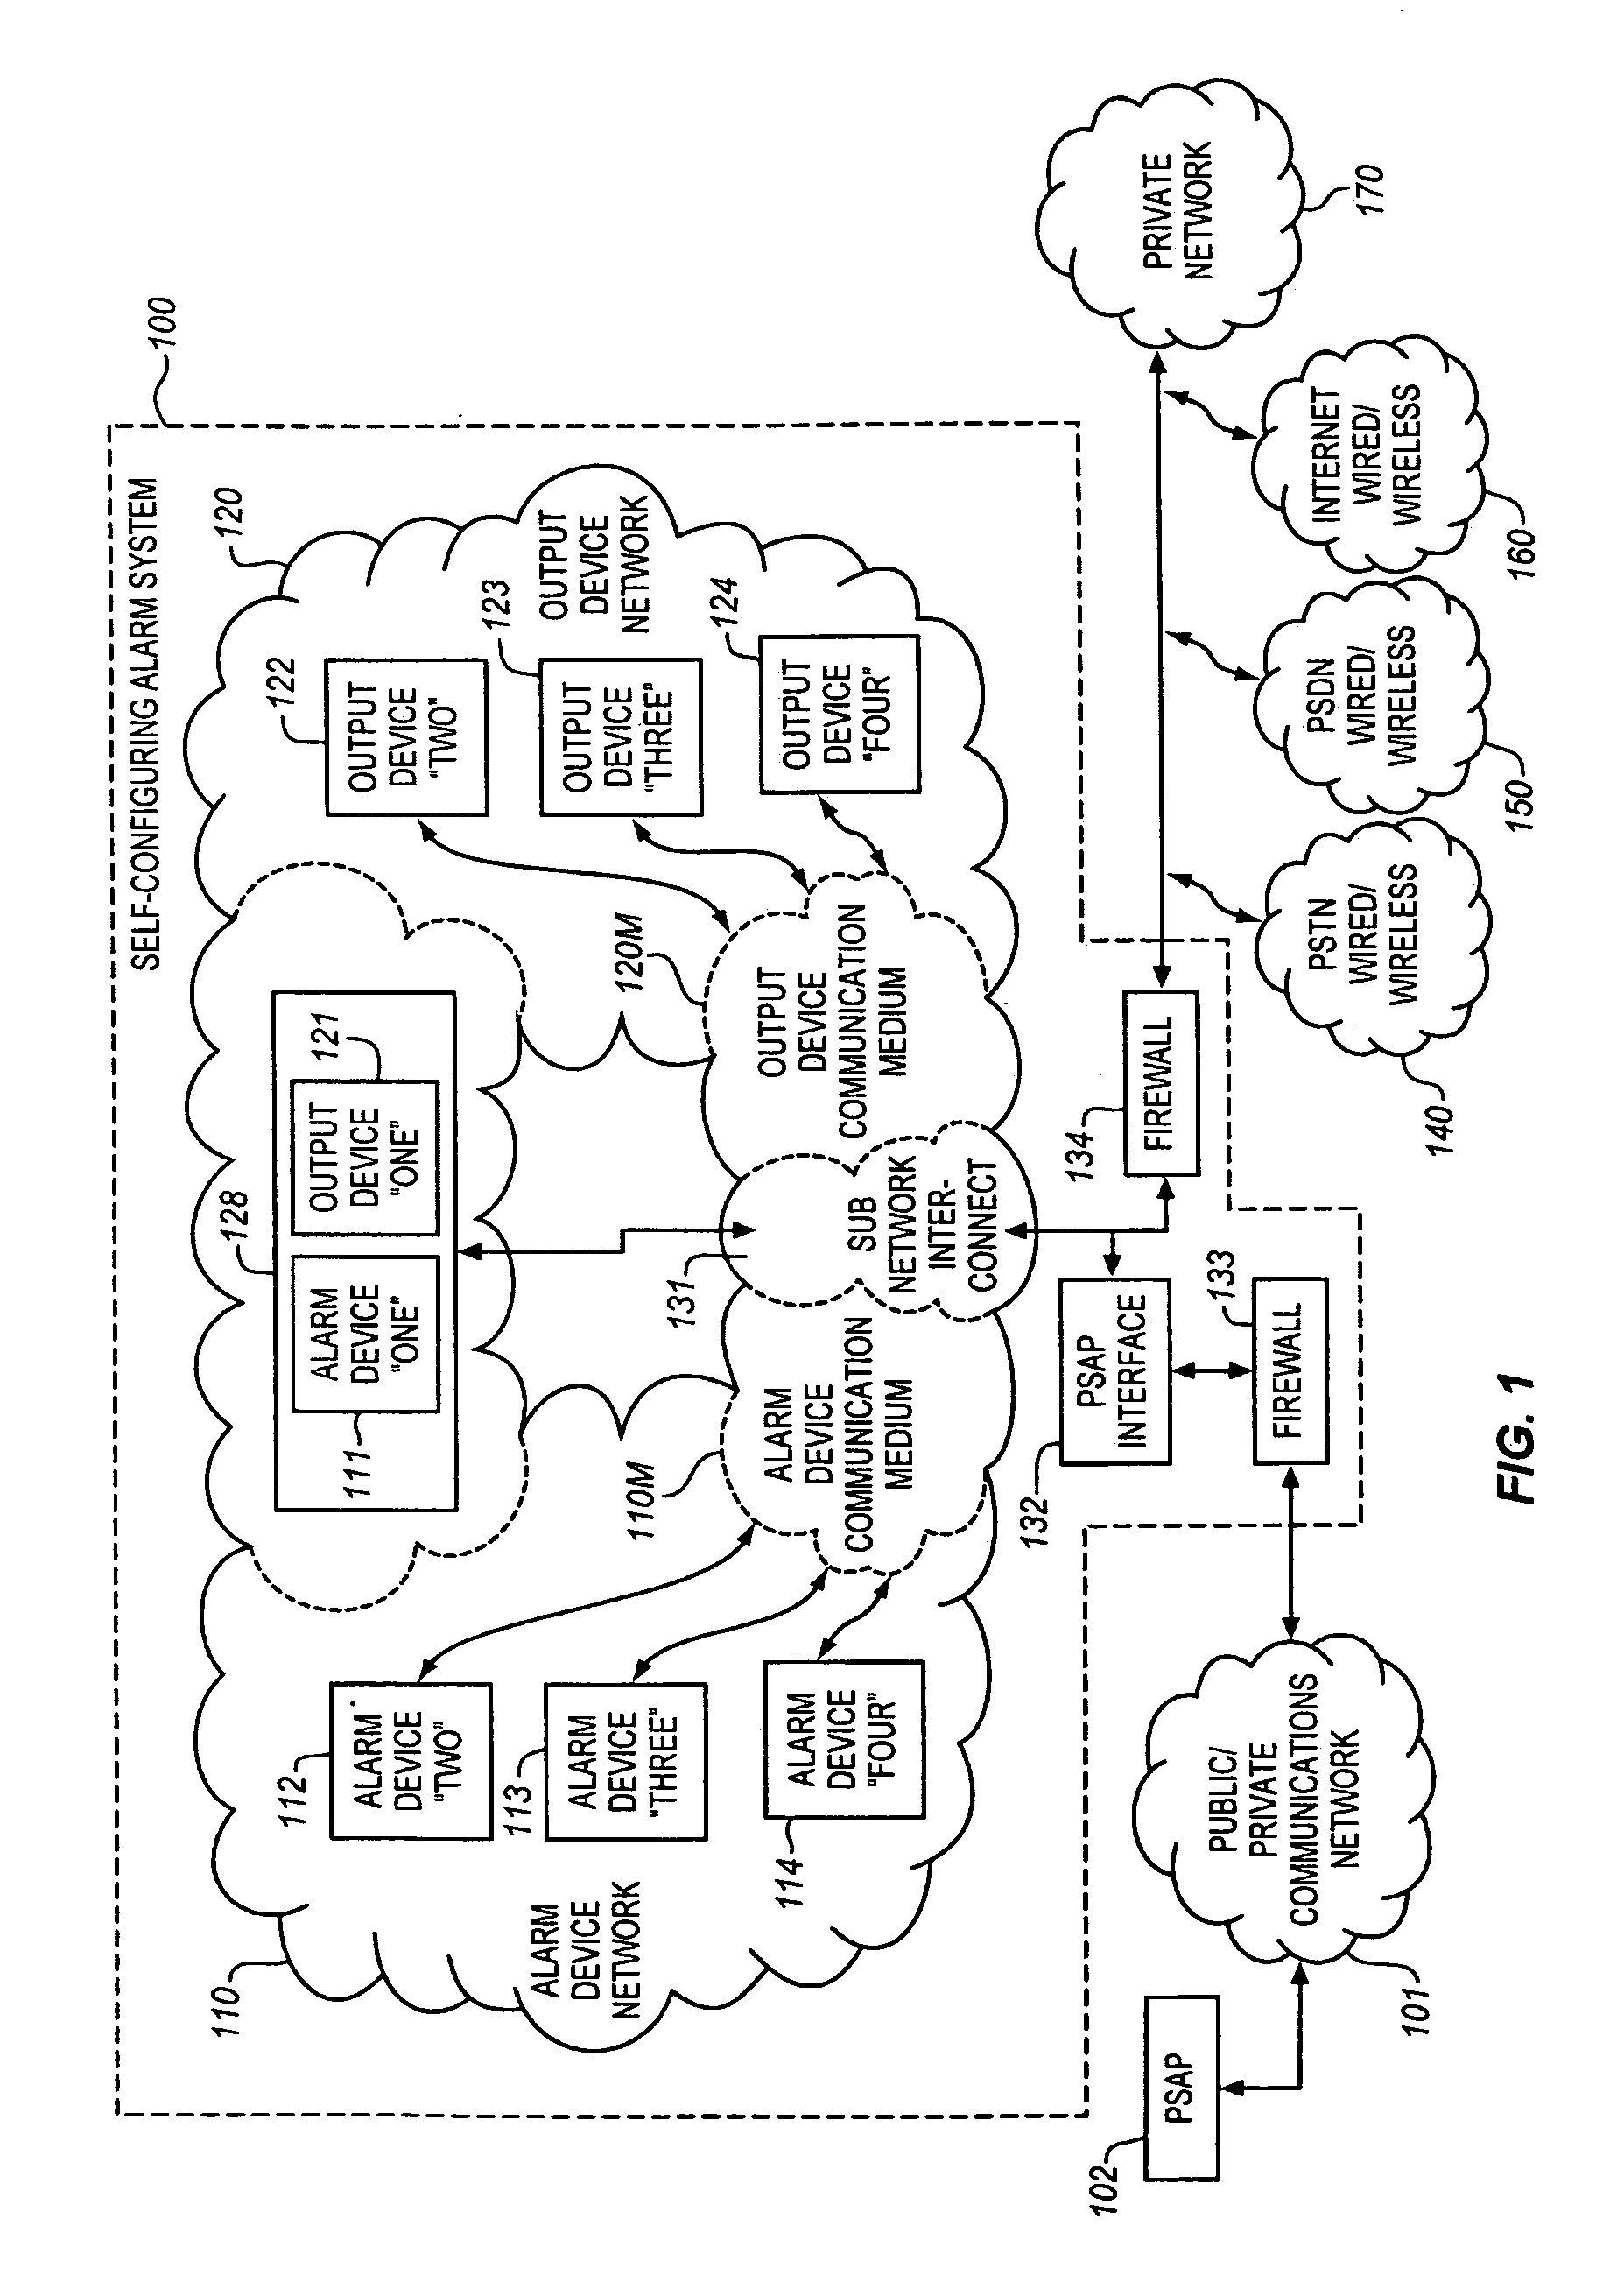 Self-configuring emergency event alarm system having connection to a public safety answering point